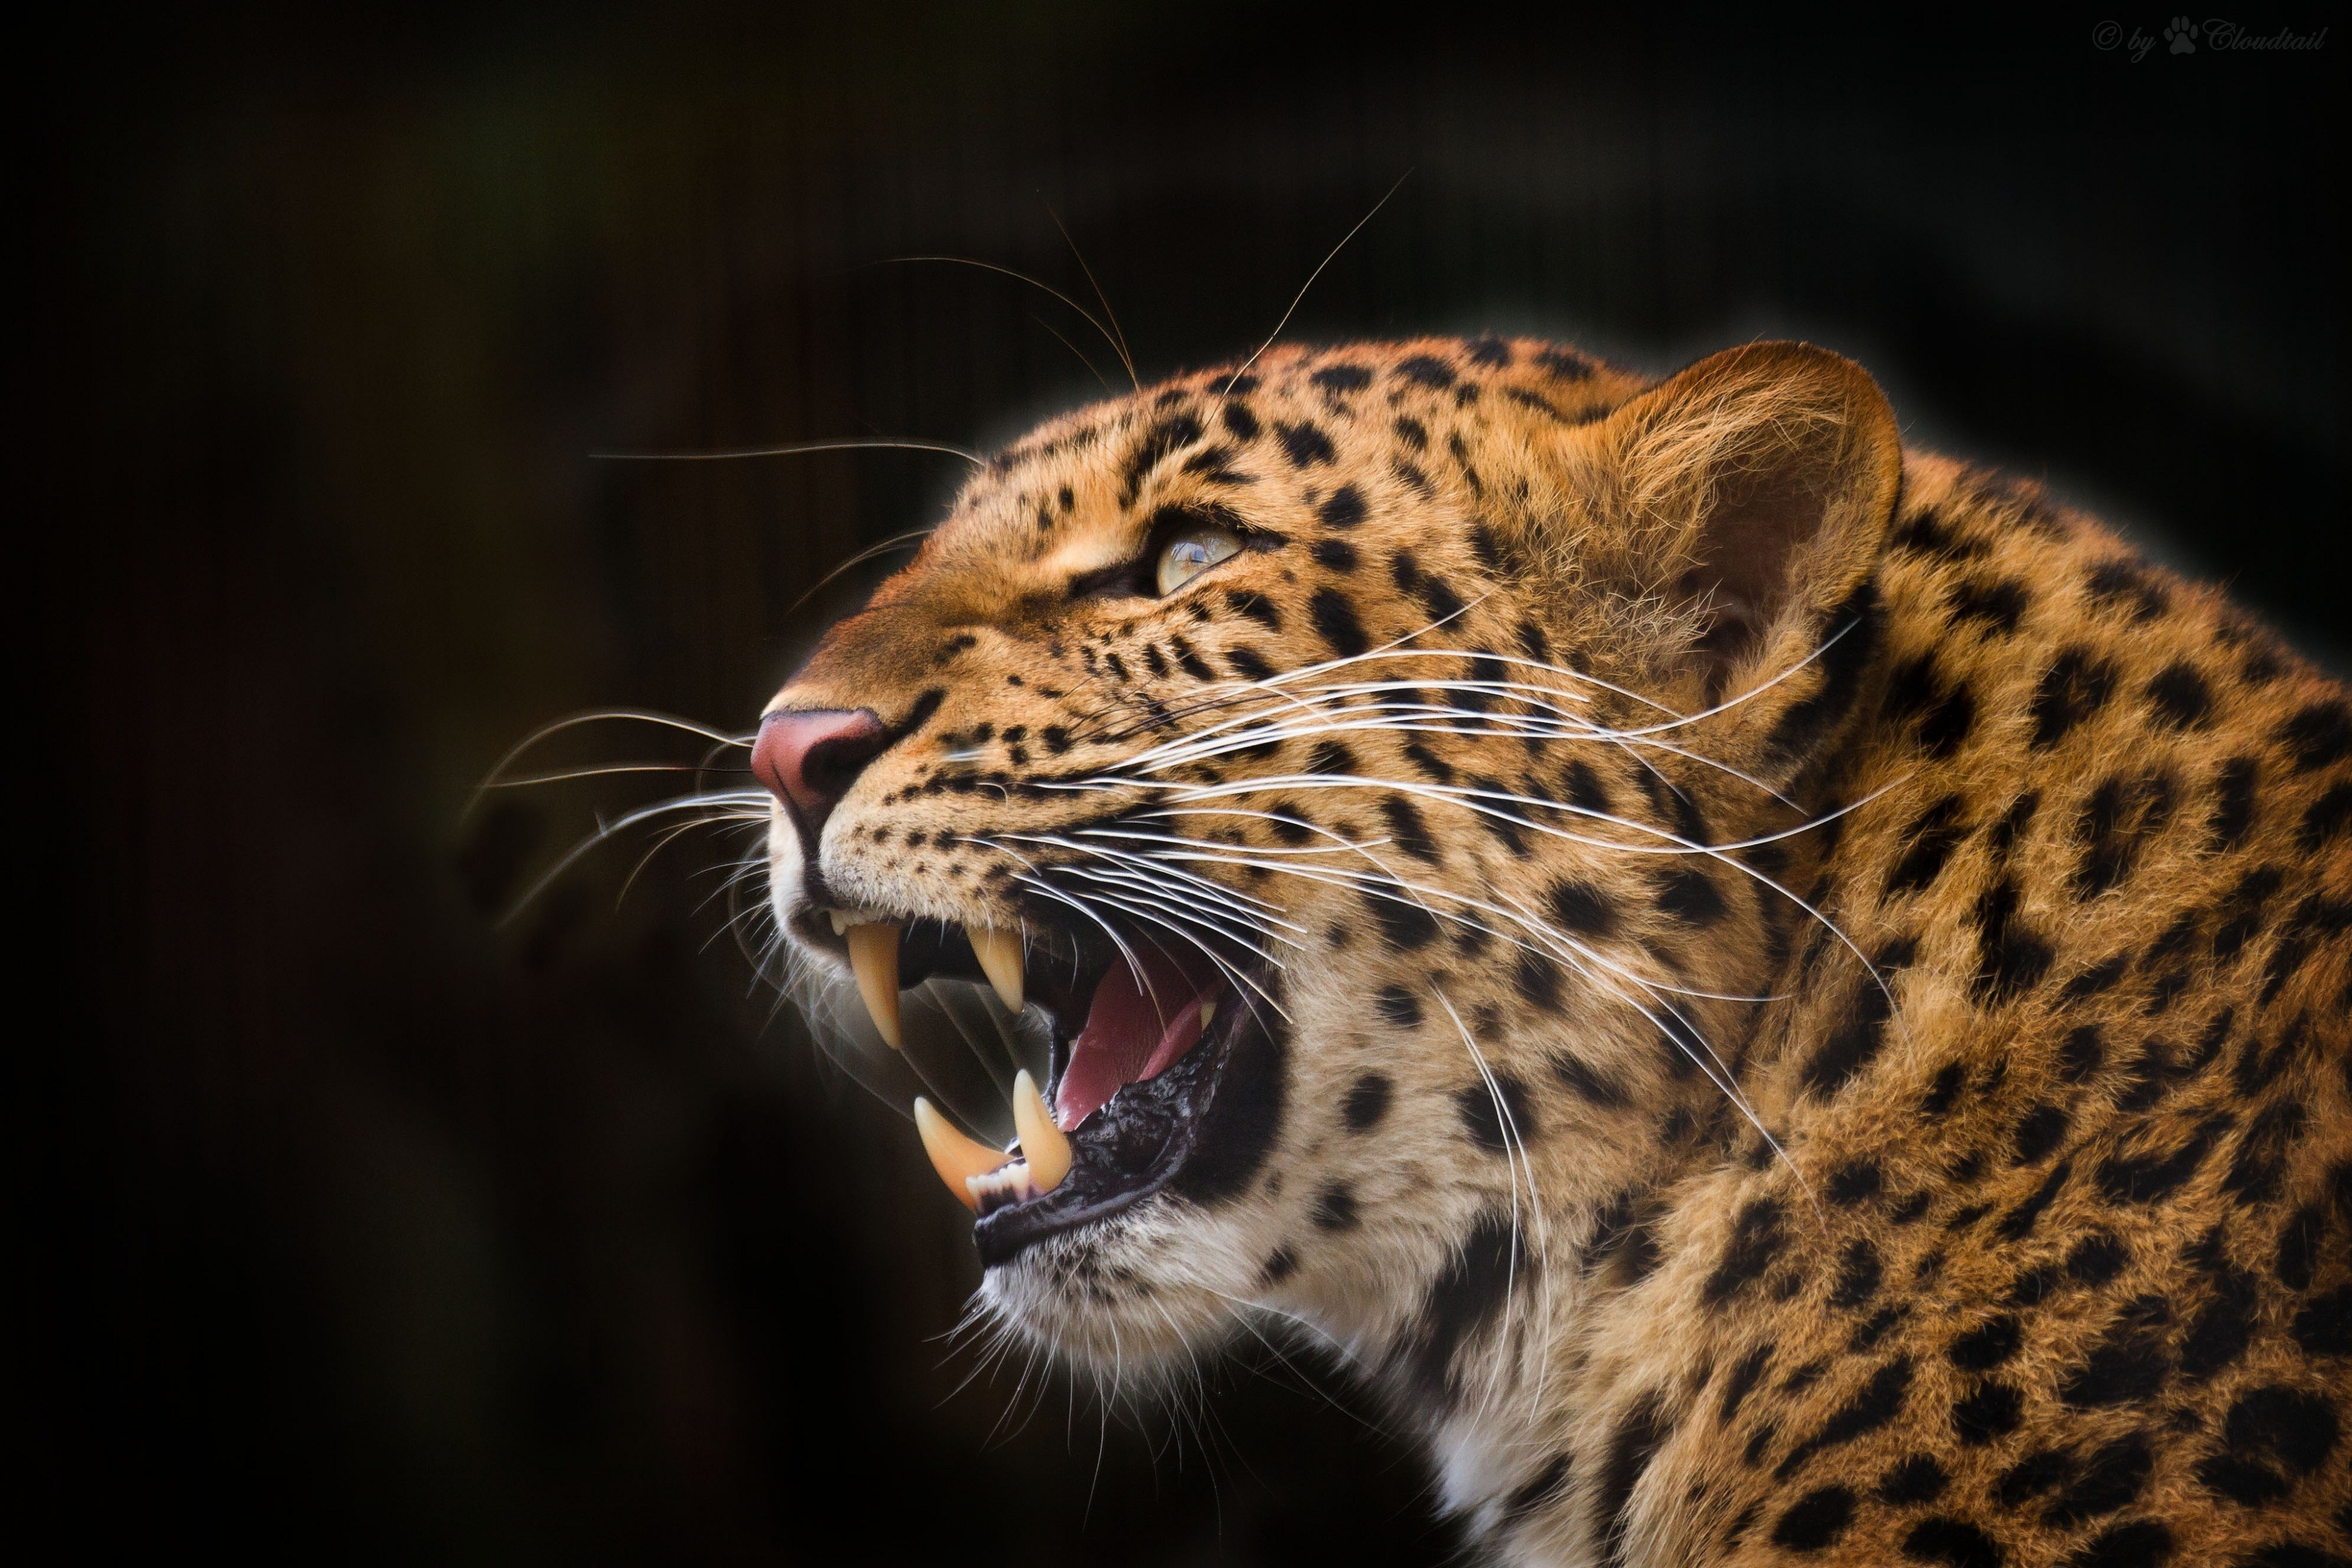 Leopard 4k Ultra HD Wallpaper and Background Image | 3888x2592 | ID:406503